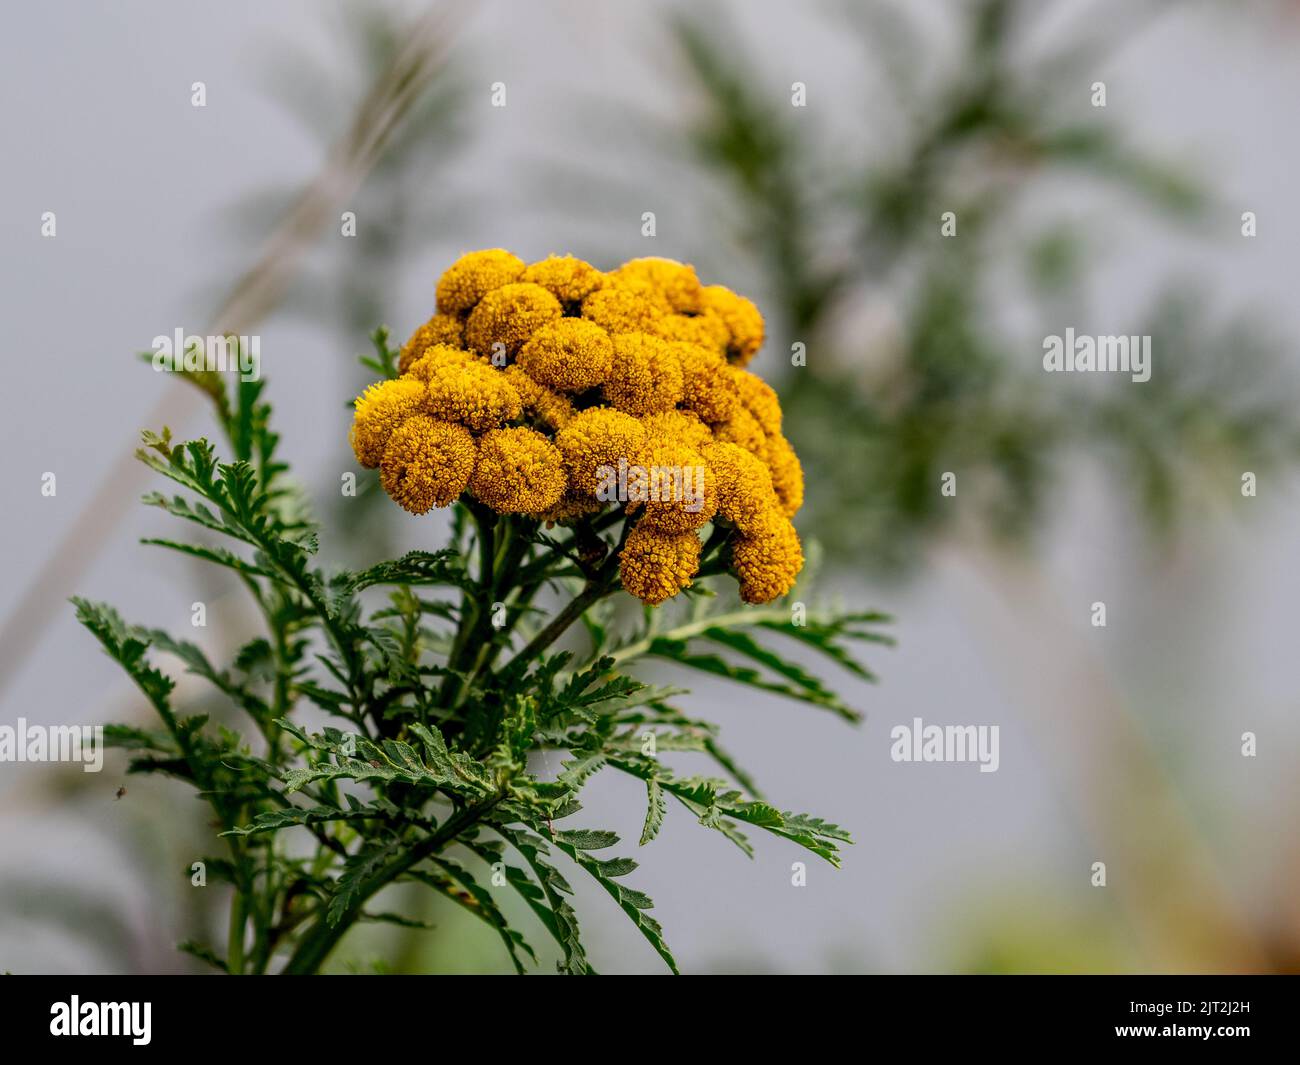 Tansy commun (Tanacetum vulgare) Banque D'Images